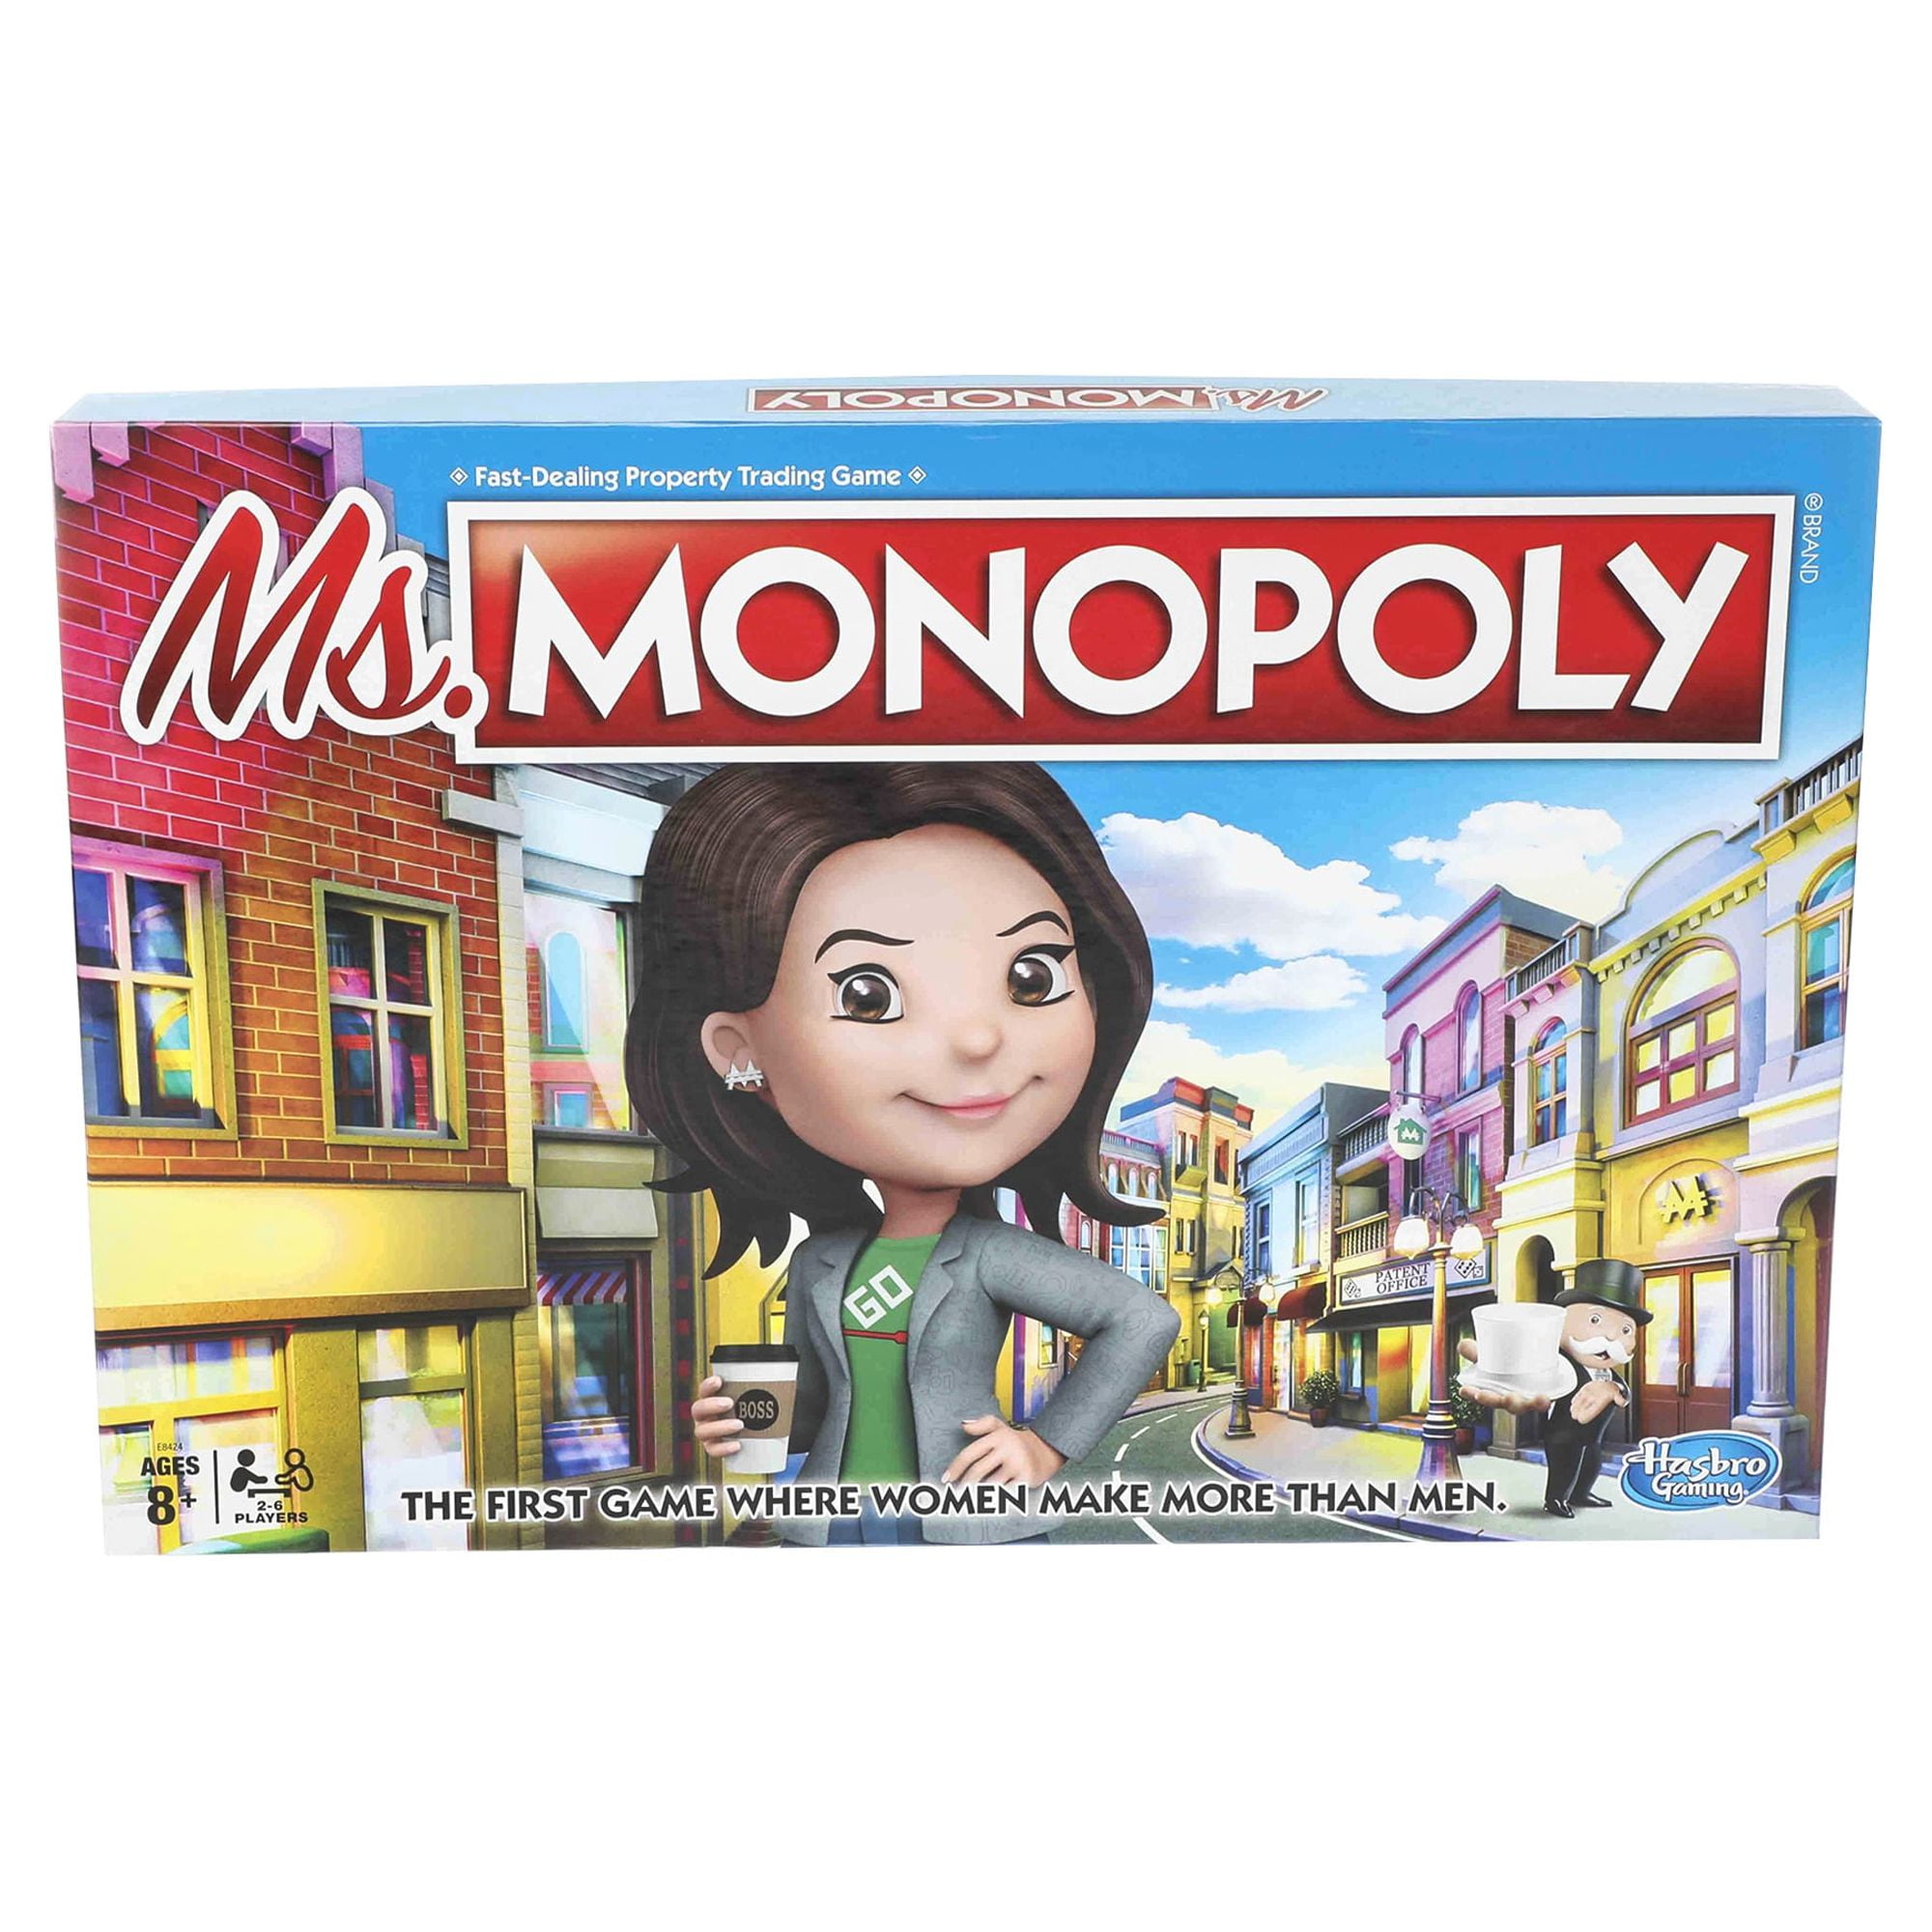 Monopoly Board Game The Classic Edition, 2-8 players